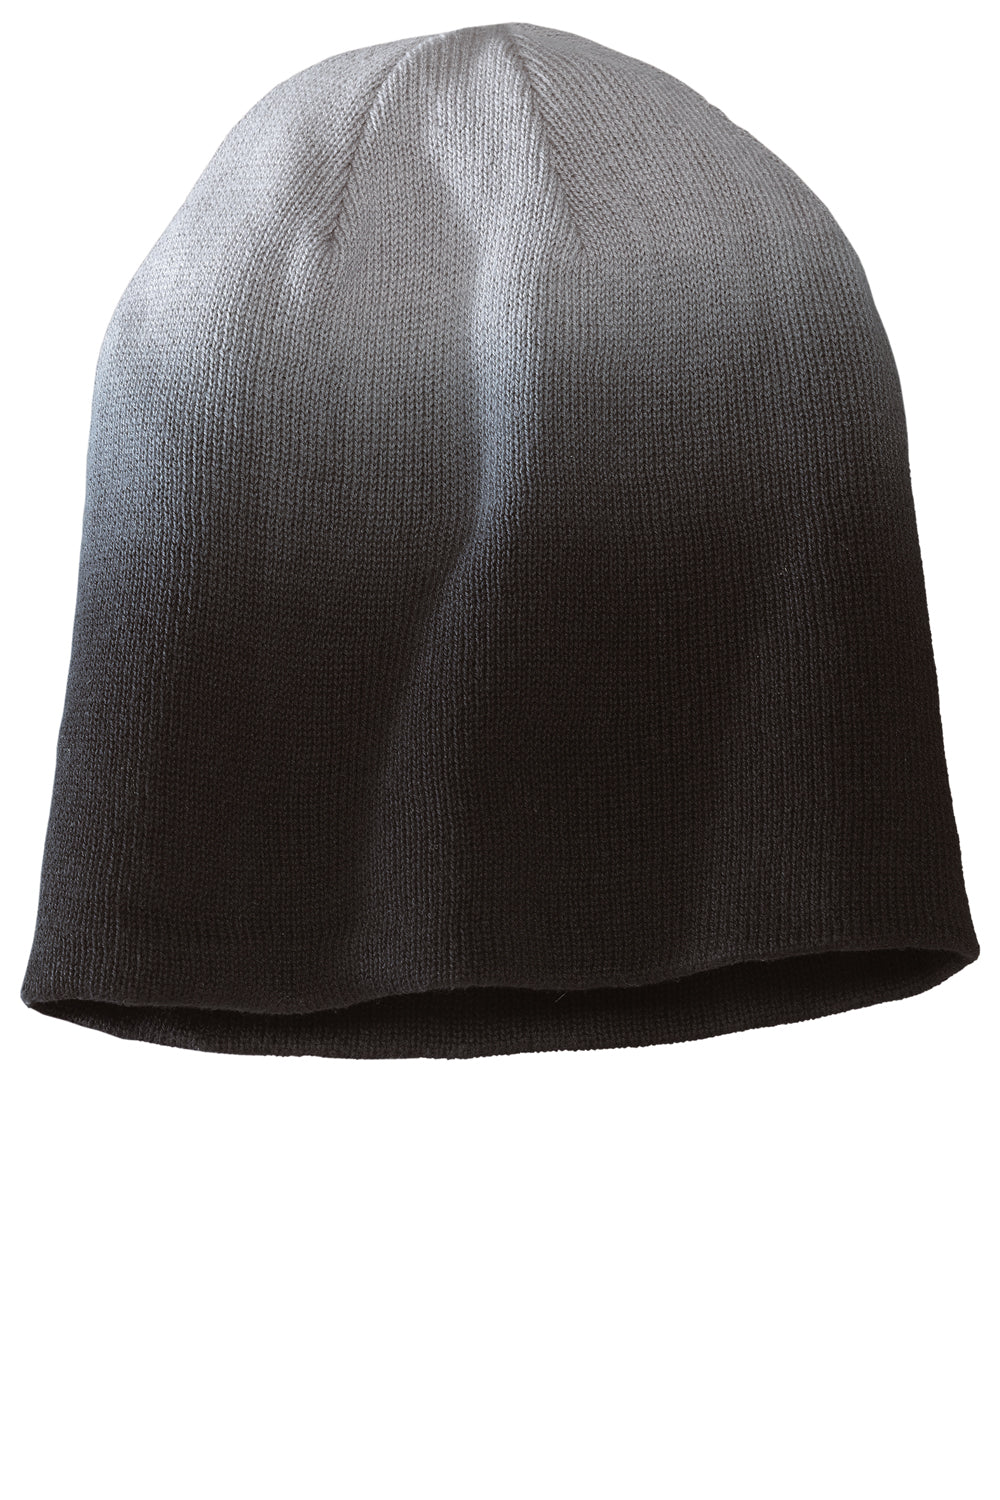 District DT618 Slouch Beanie Black Dip Dye Front